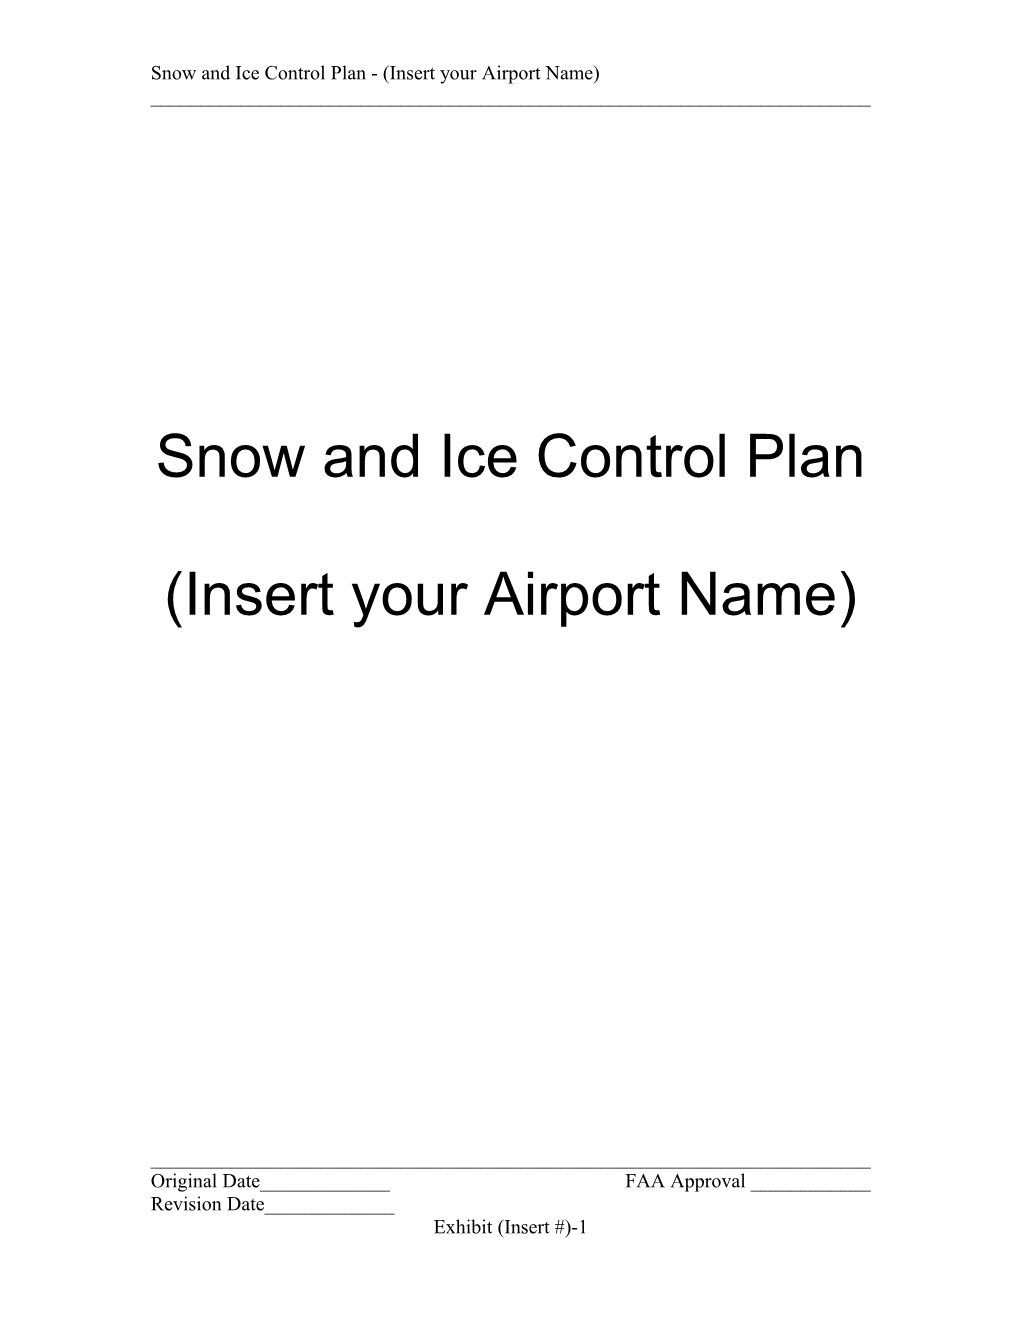 Snow and Ice Control Plan (S I C P) Template, August 2016